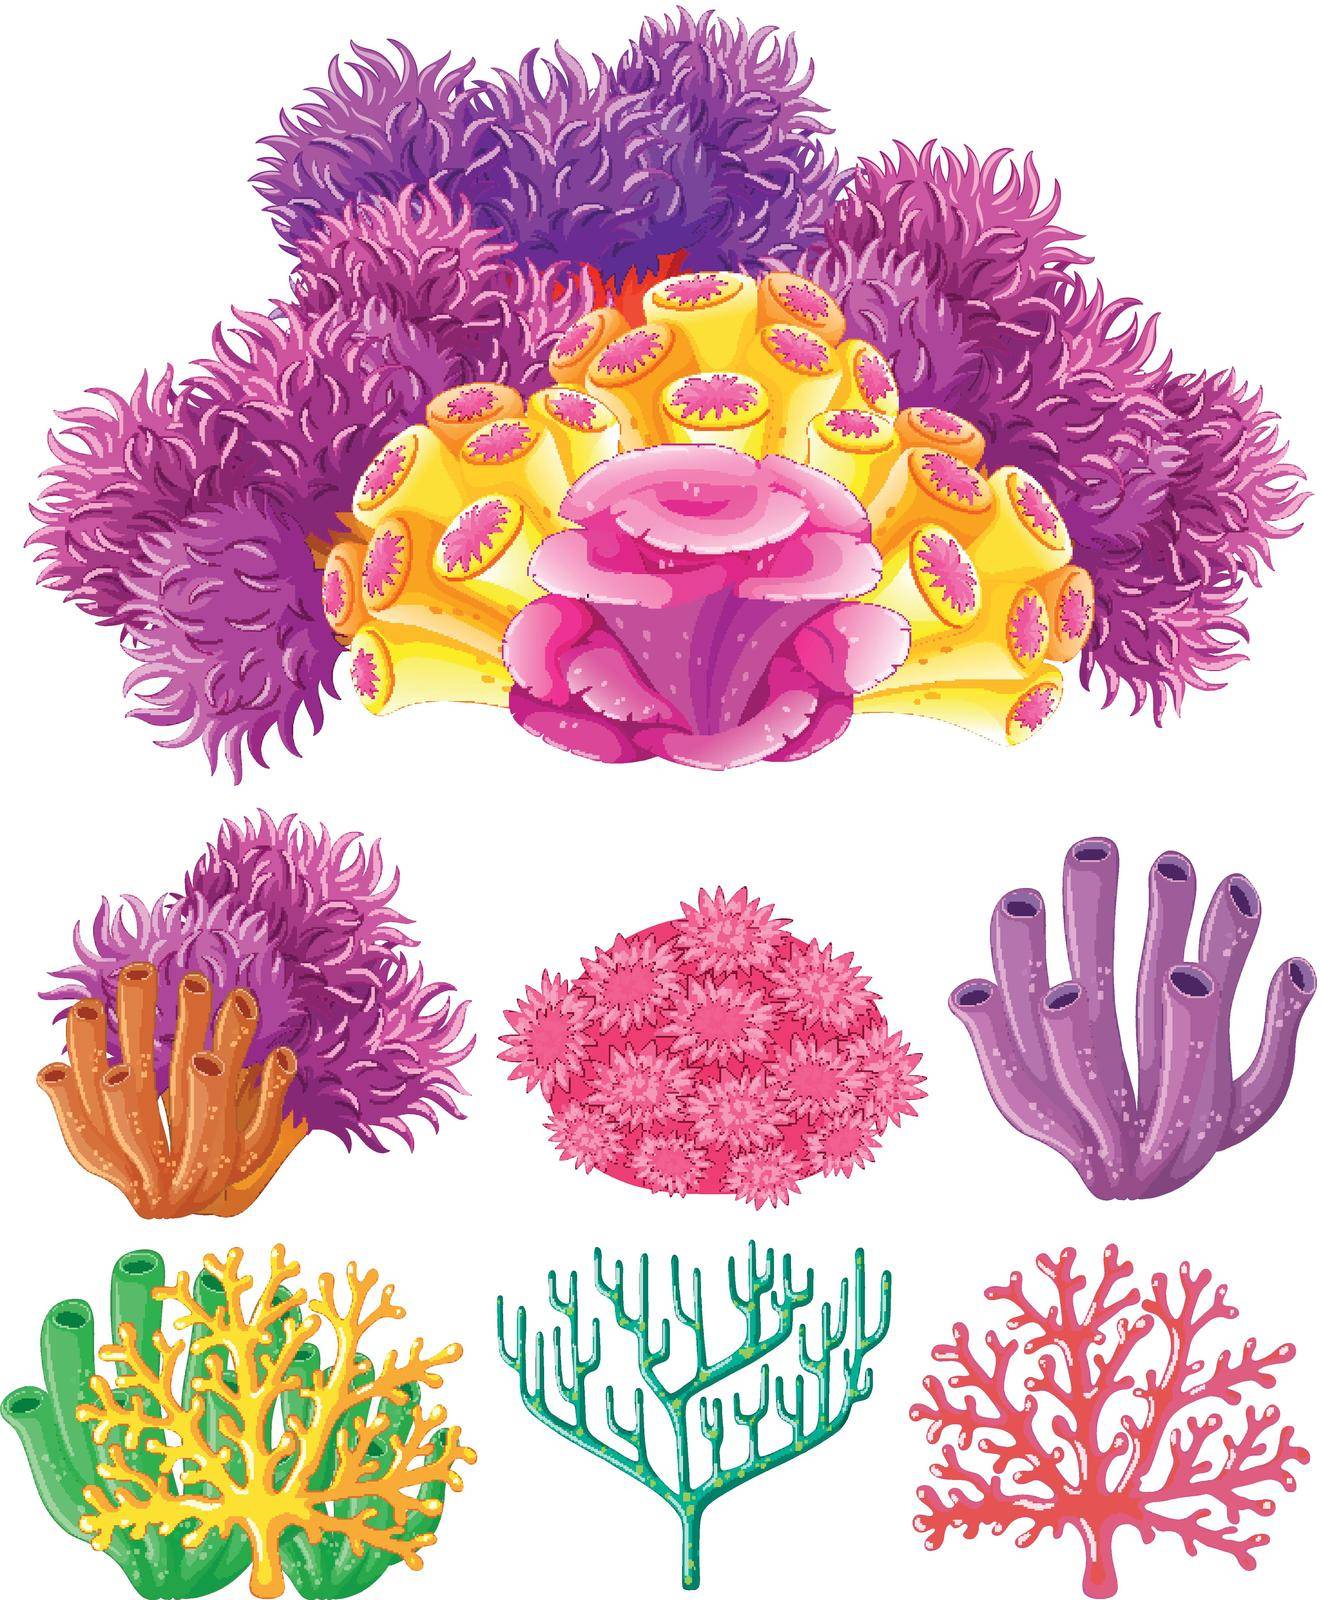 Coral reef on white background illustration